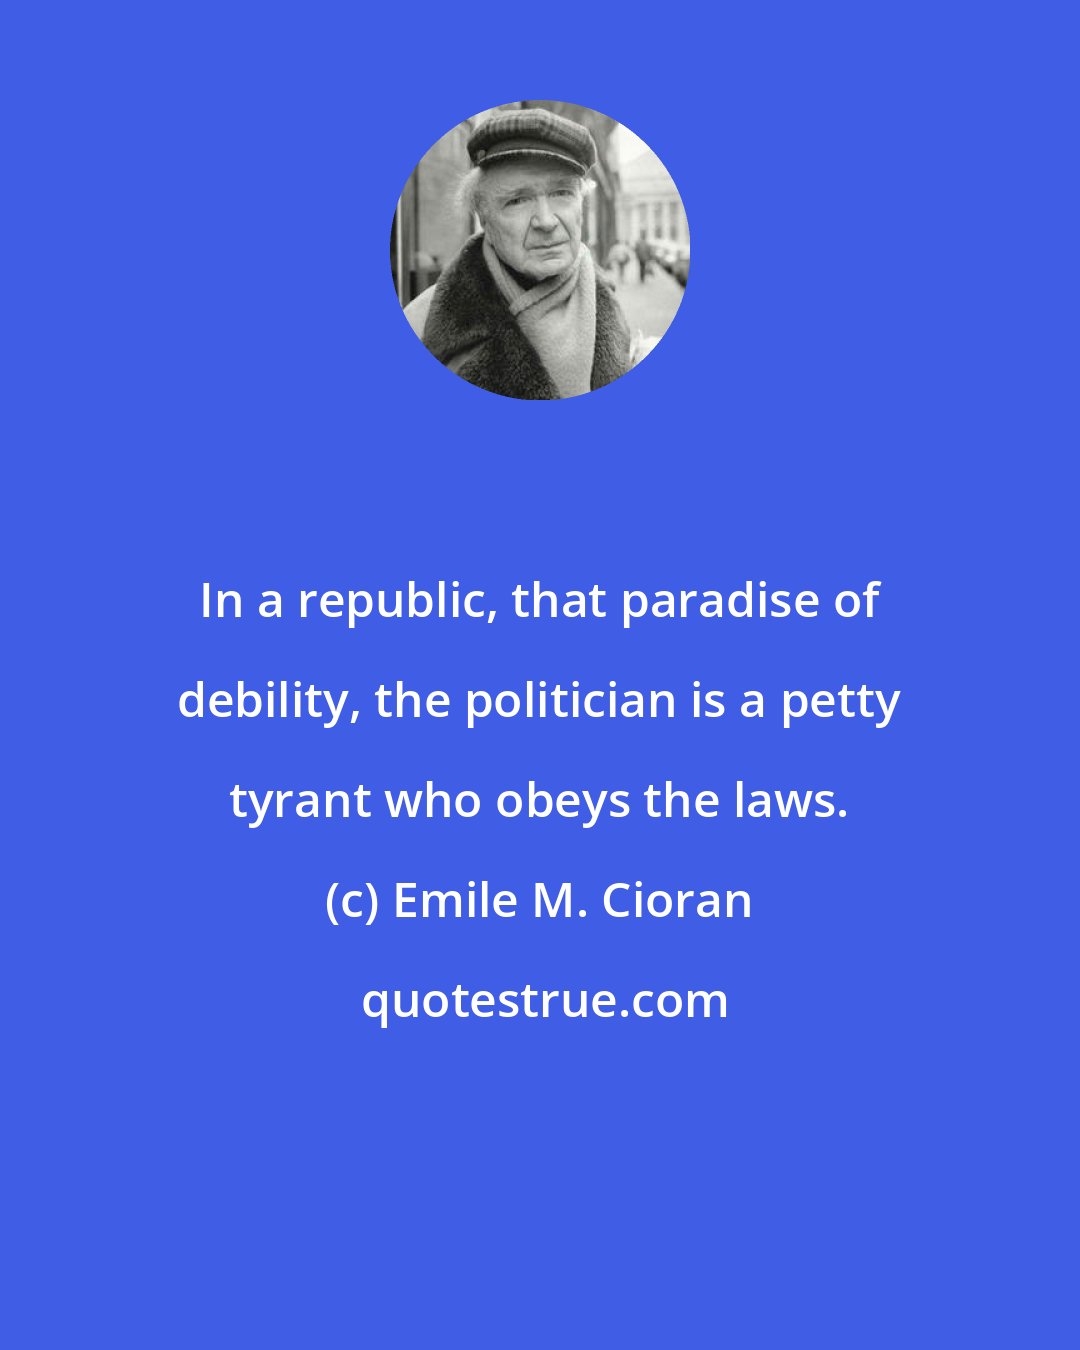 Emile M. Cioran: In a republic, that paradise of debility, the politician is a petty tyrant who obeys the laws.